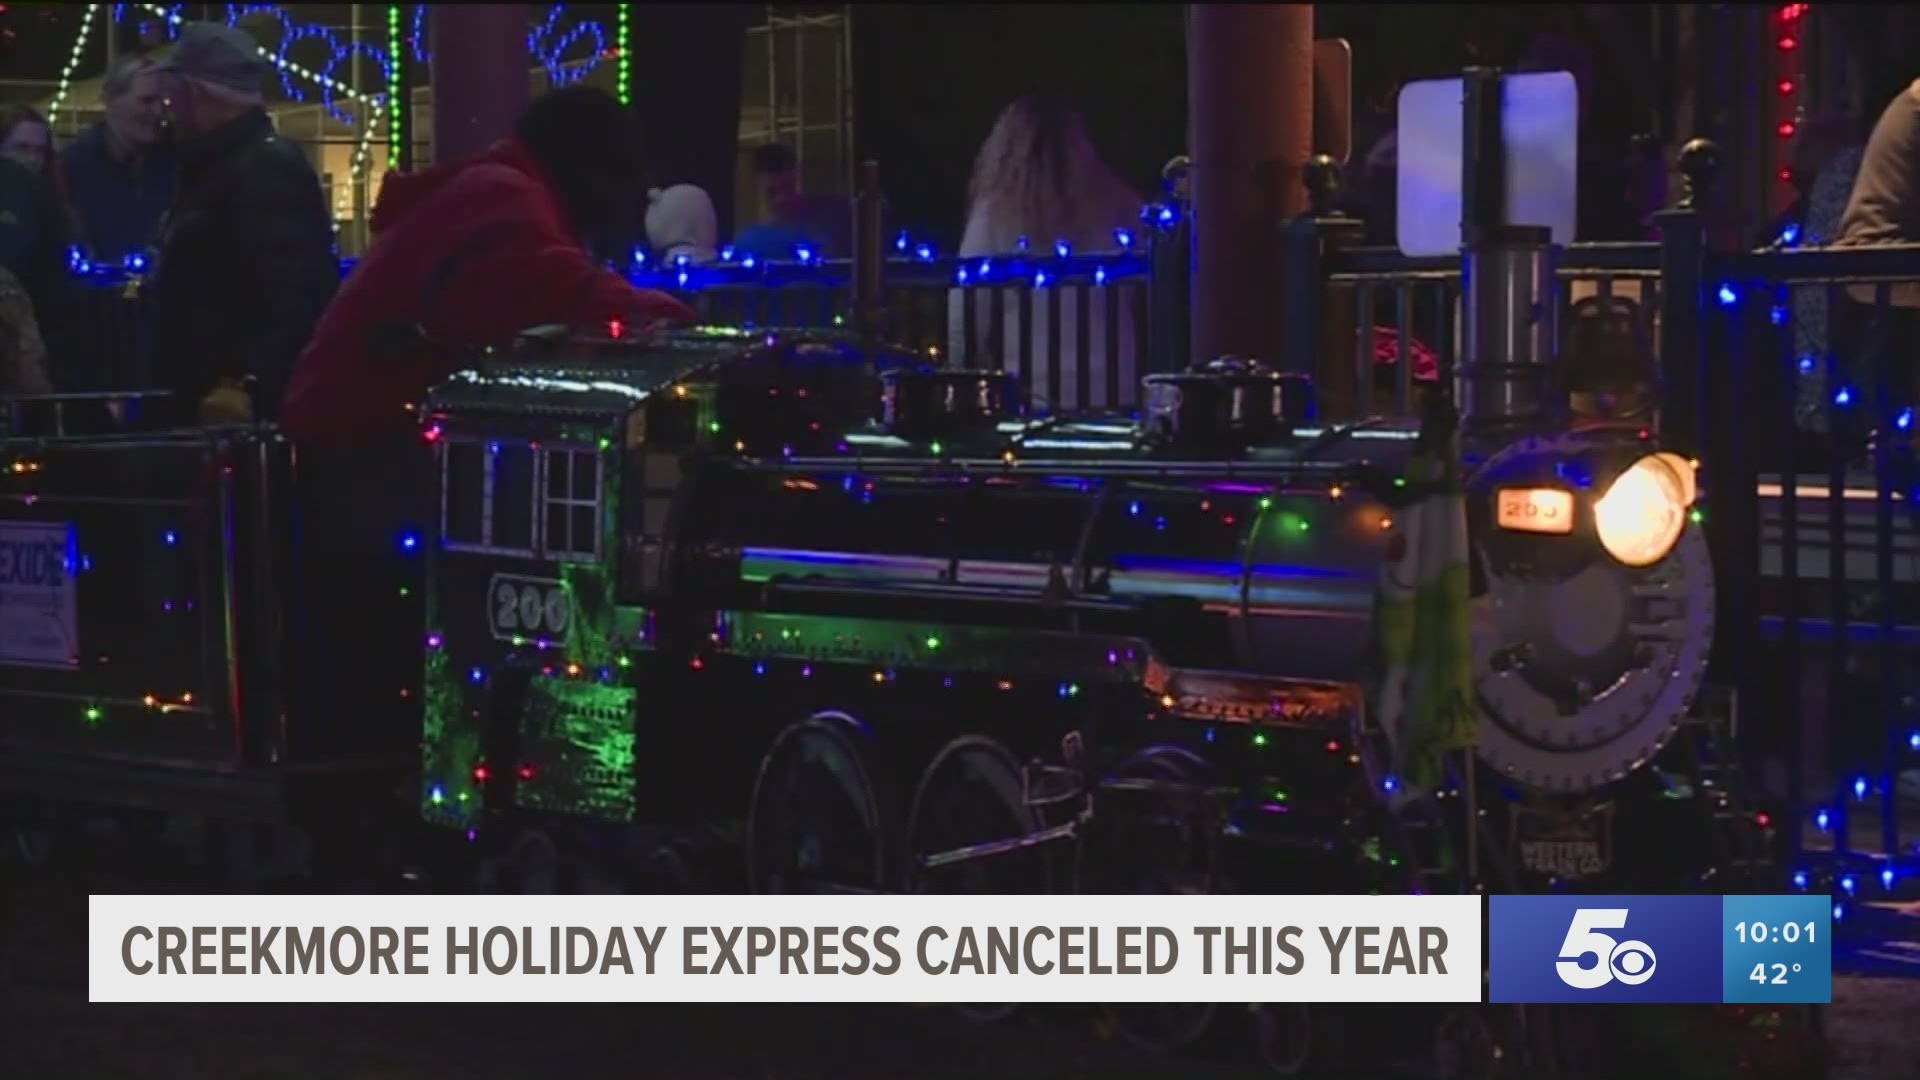 Due to the ongoing COVID-19 pandemic, the beloved Holiday Express Train will not be in operation this year at Creekmore Park in Fort Smith.